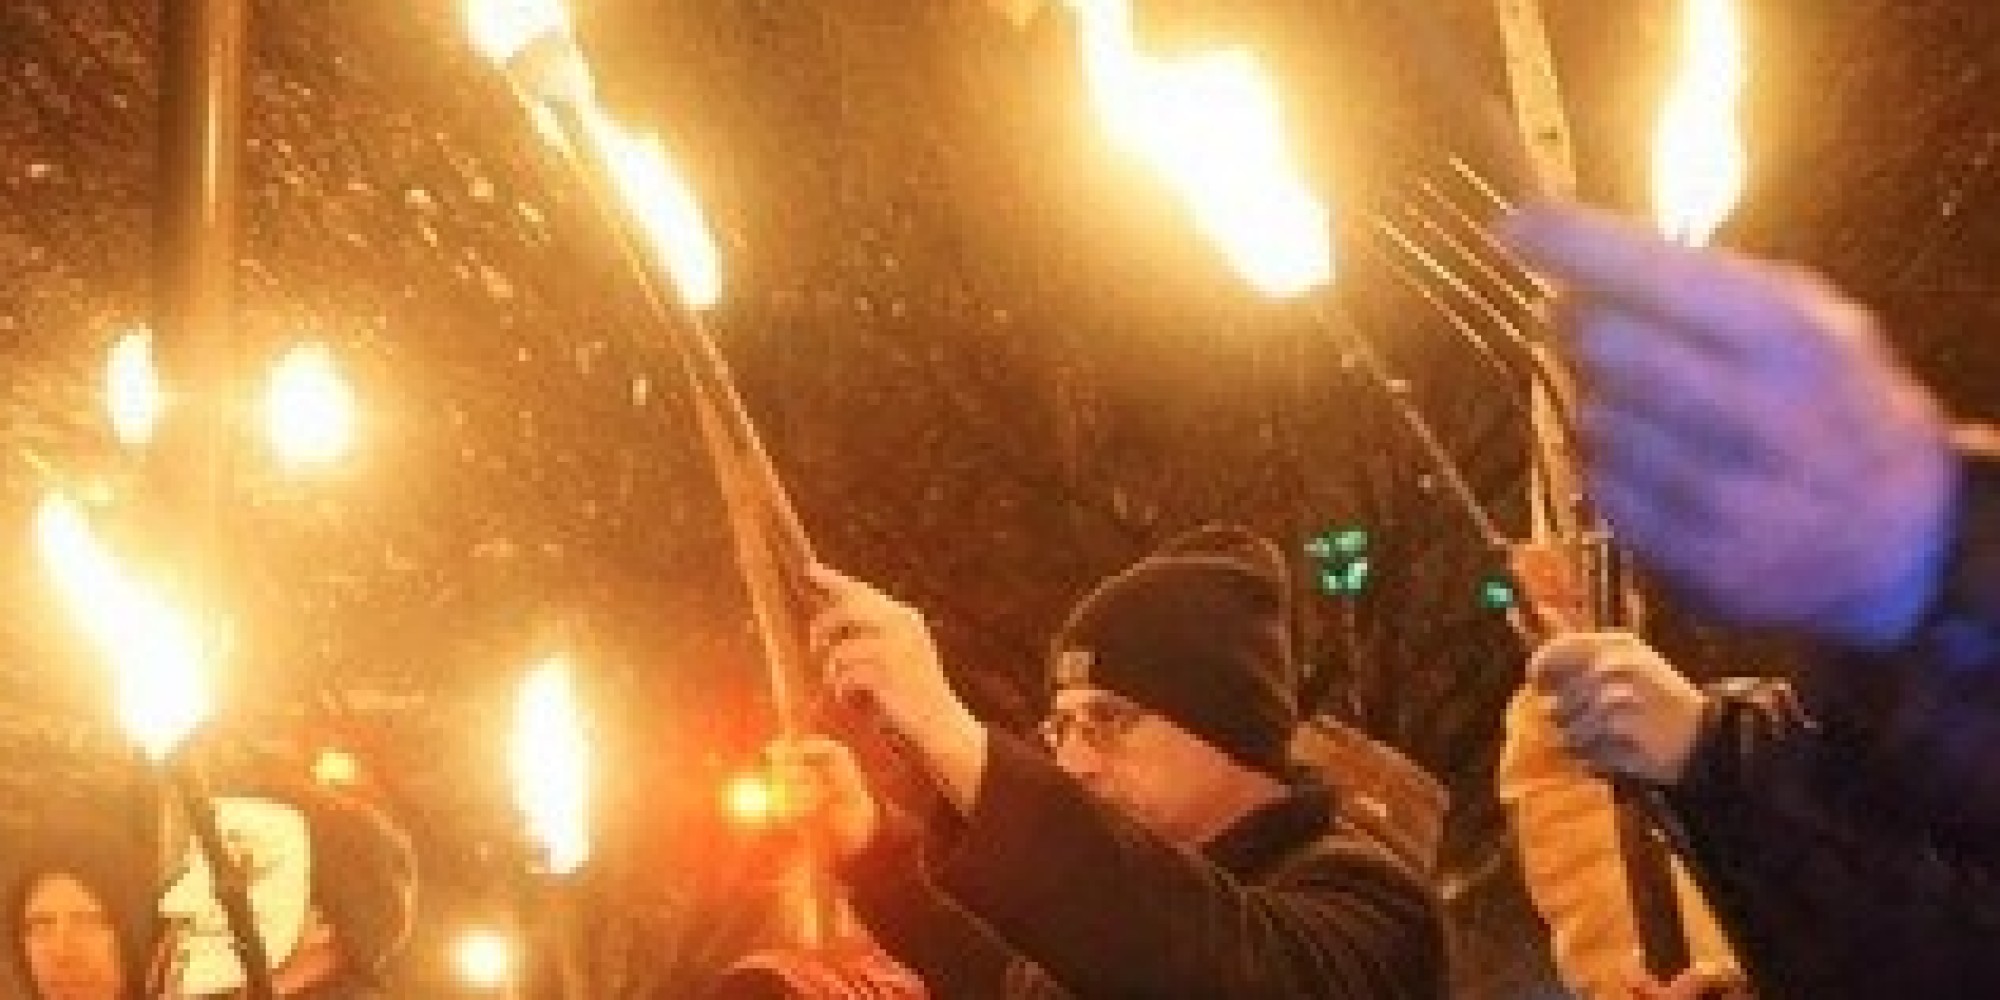 Angry Residents Wave Pitchforks, Torches In Protest Of Mayor's